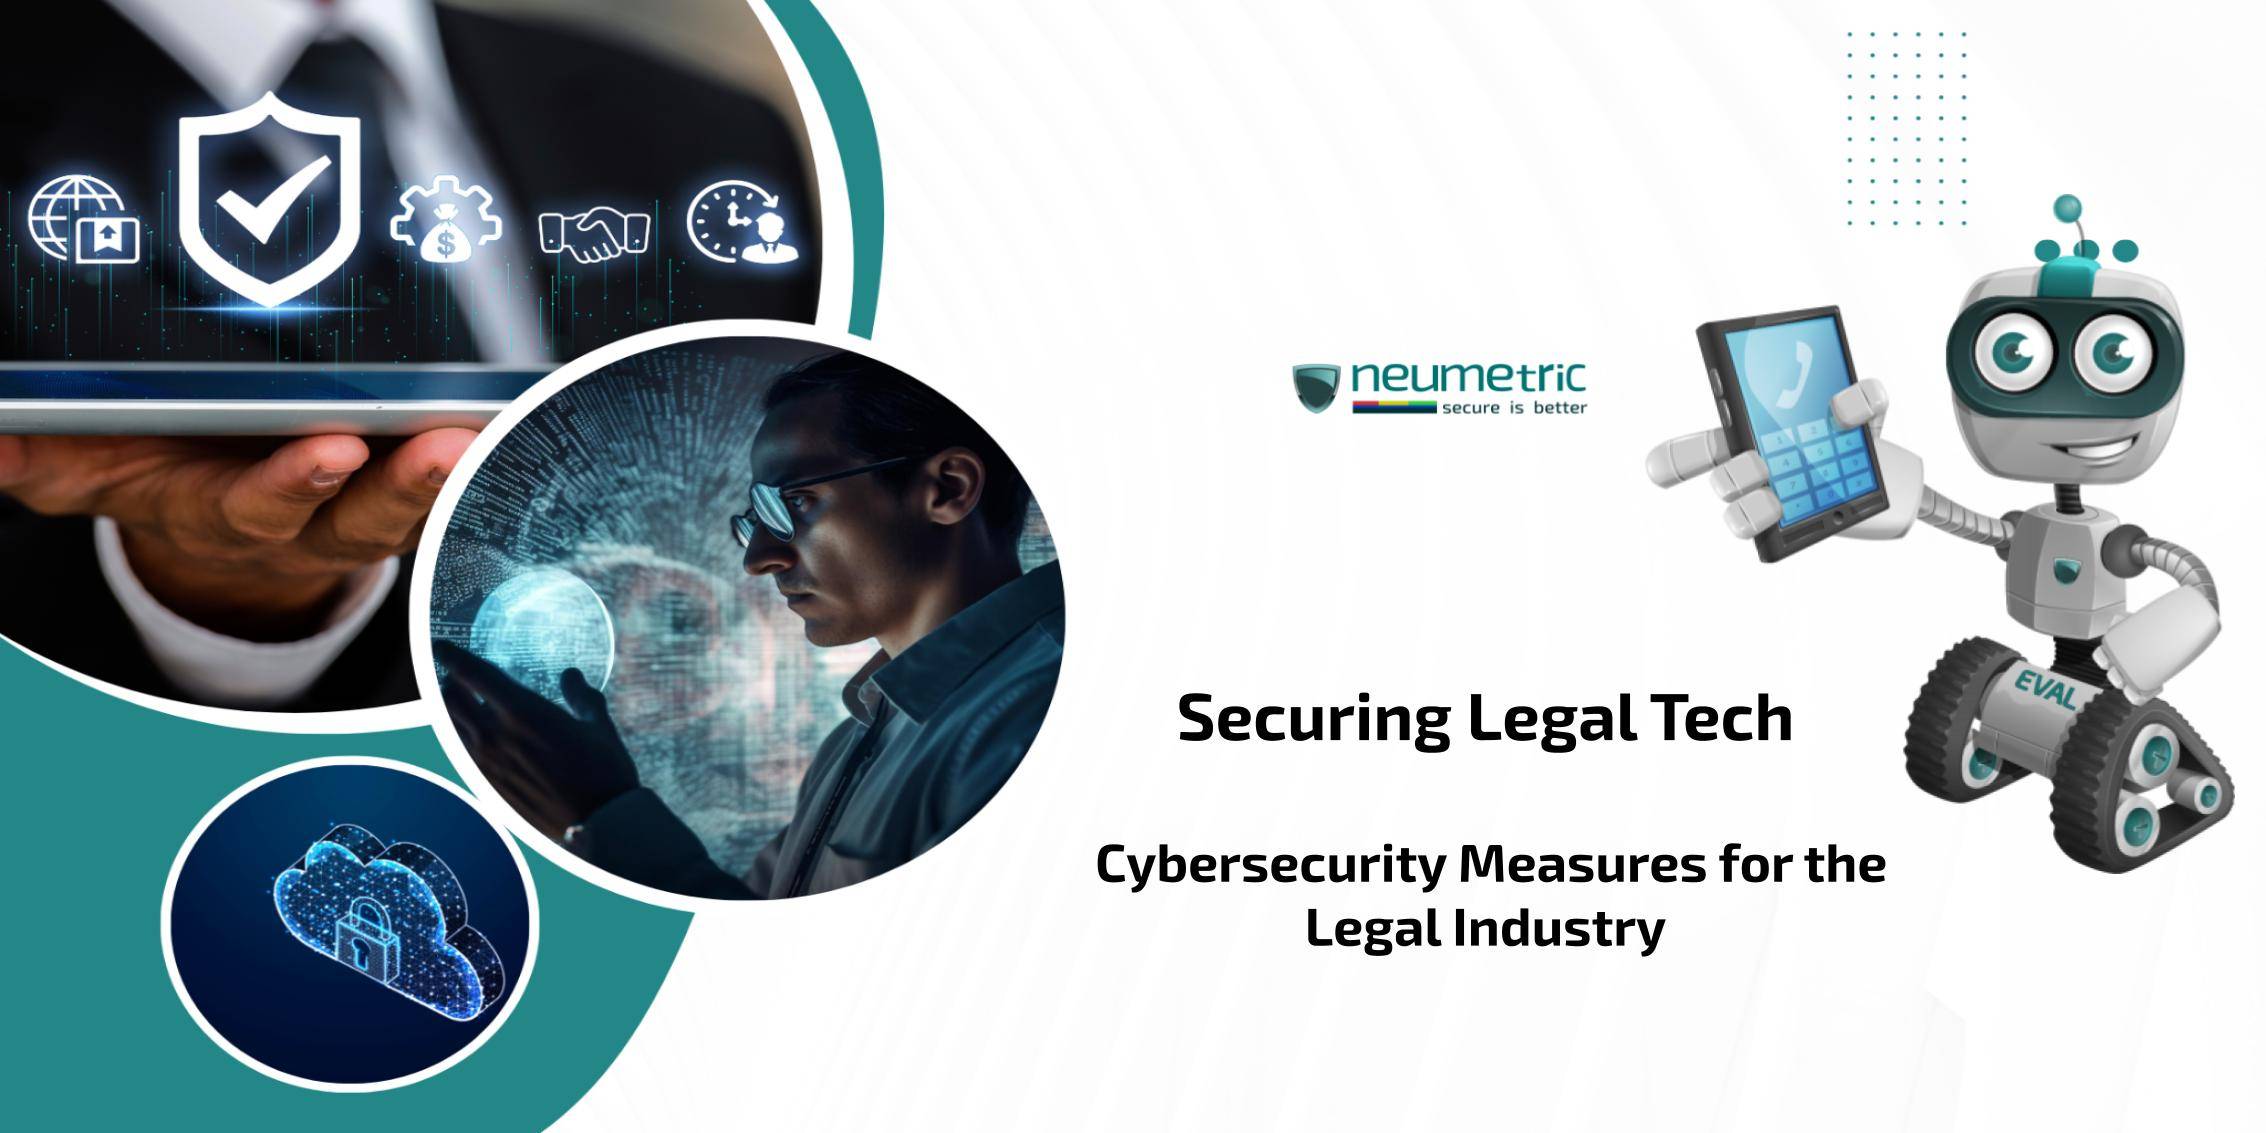 Securing Legal Tech: Cybersecurity Measures for the Legal Industry